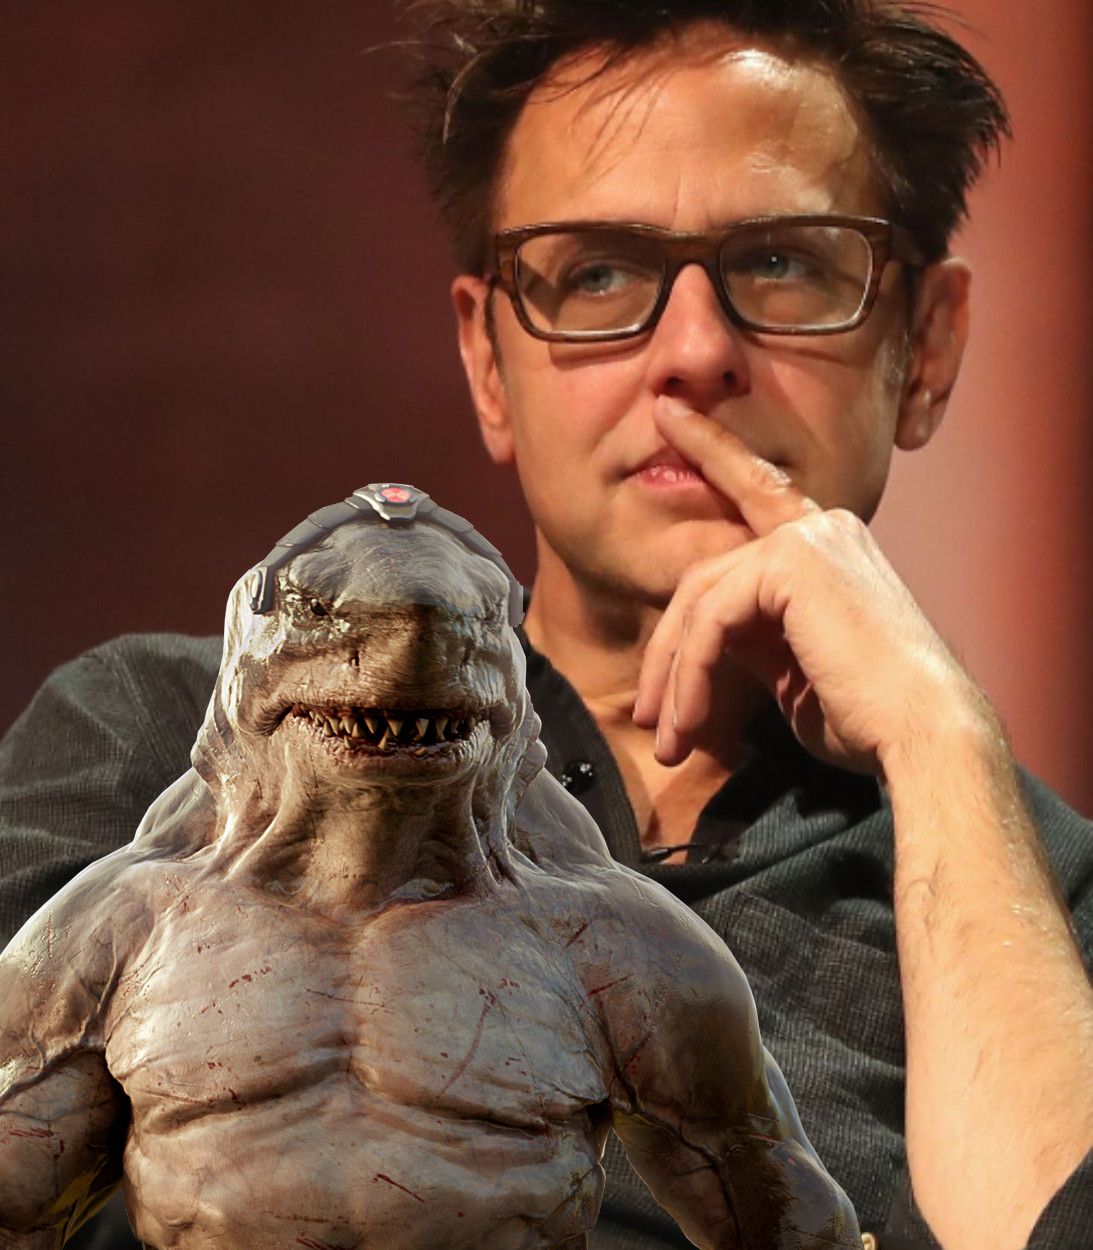 King Shark James Gunn The Suicide Squad Vertical